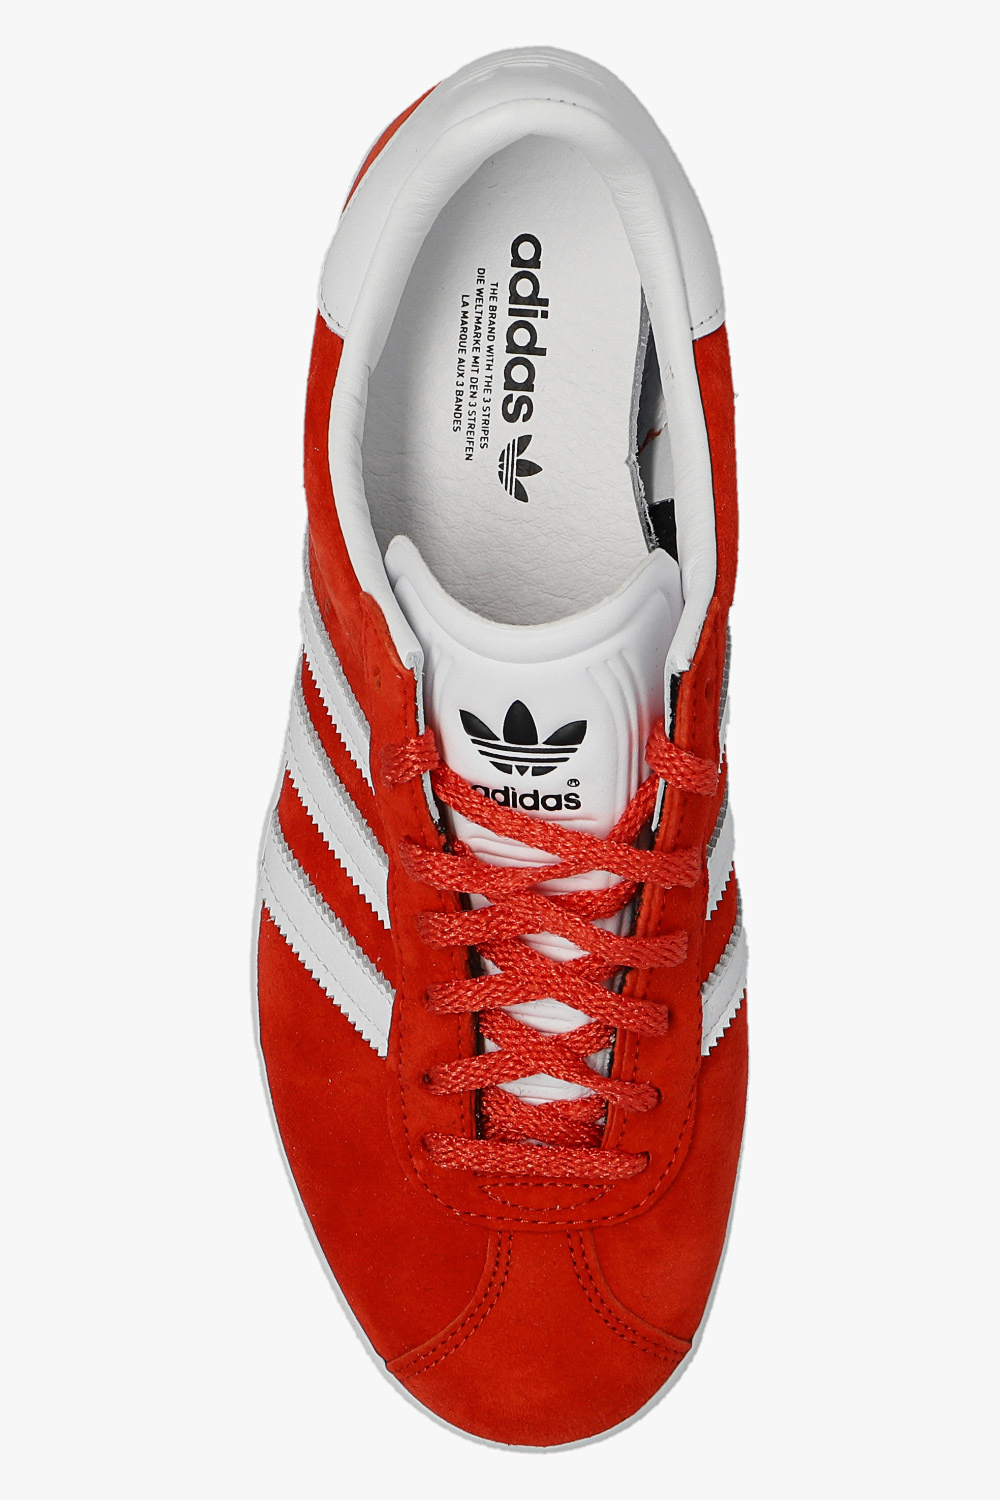 IetpShops Norway - Red 'Gazelle 85' sneakers ADIDAS Originals - adidas  climalite warm layering top of black jeans